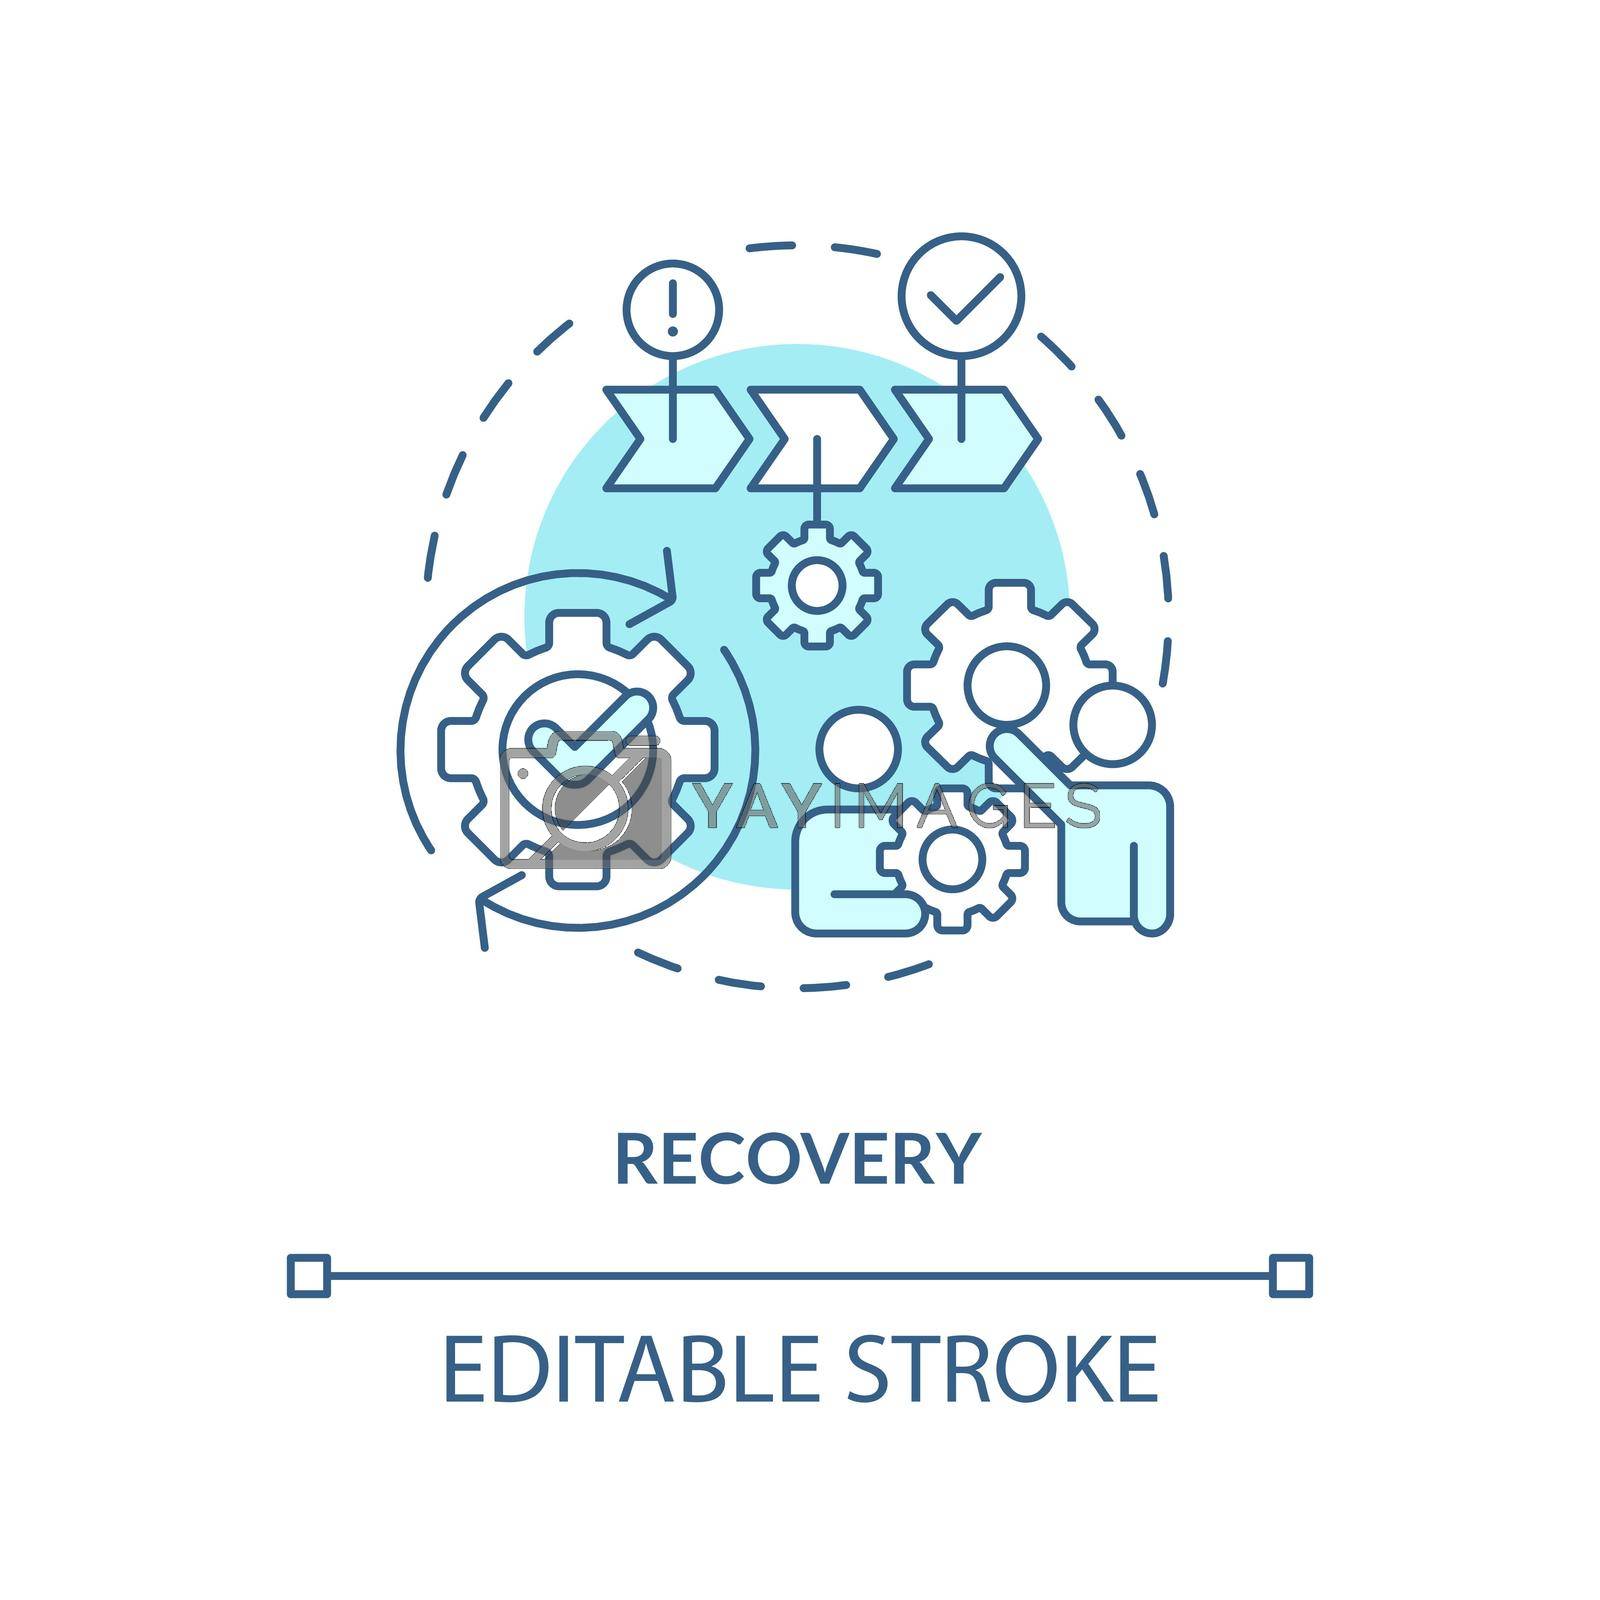 Royalty free image of Recovery turquoise concept icon by bsd studio